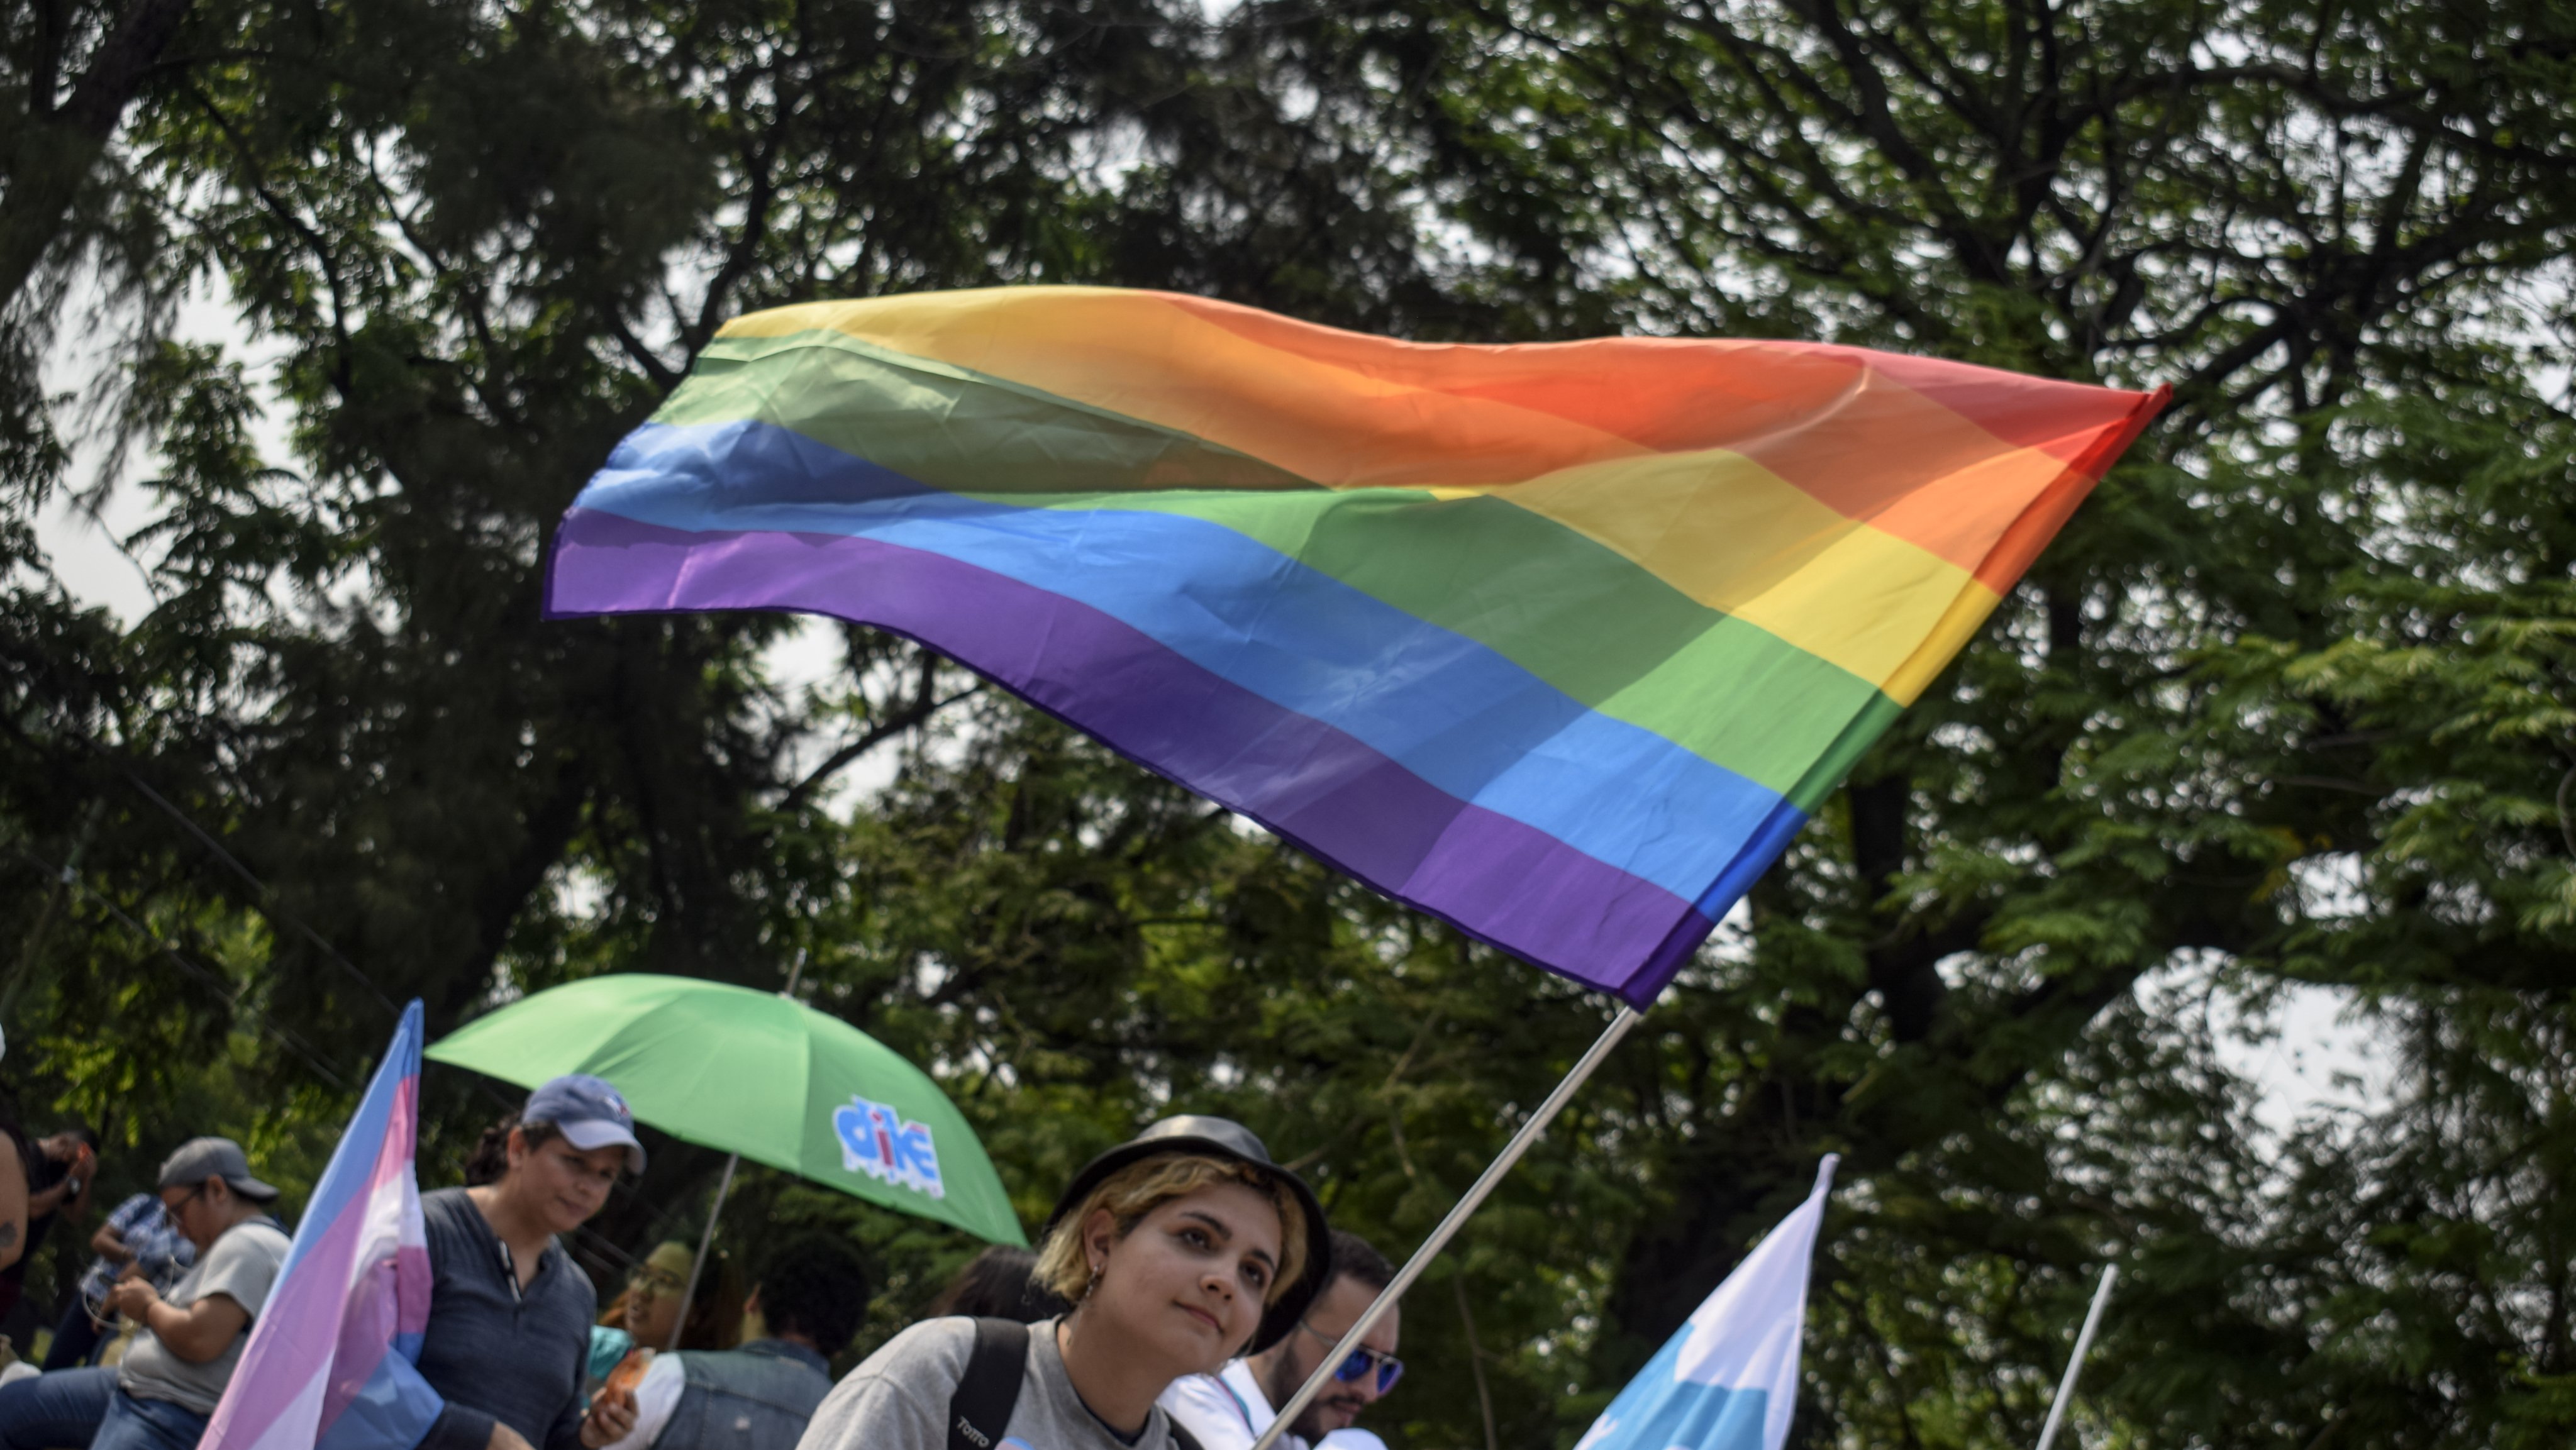 Demonstration In El Salvador On International Day Against Homophobia, Biphobia And Transphobia